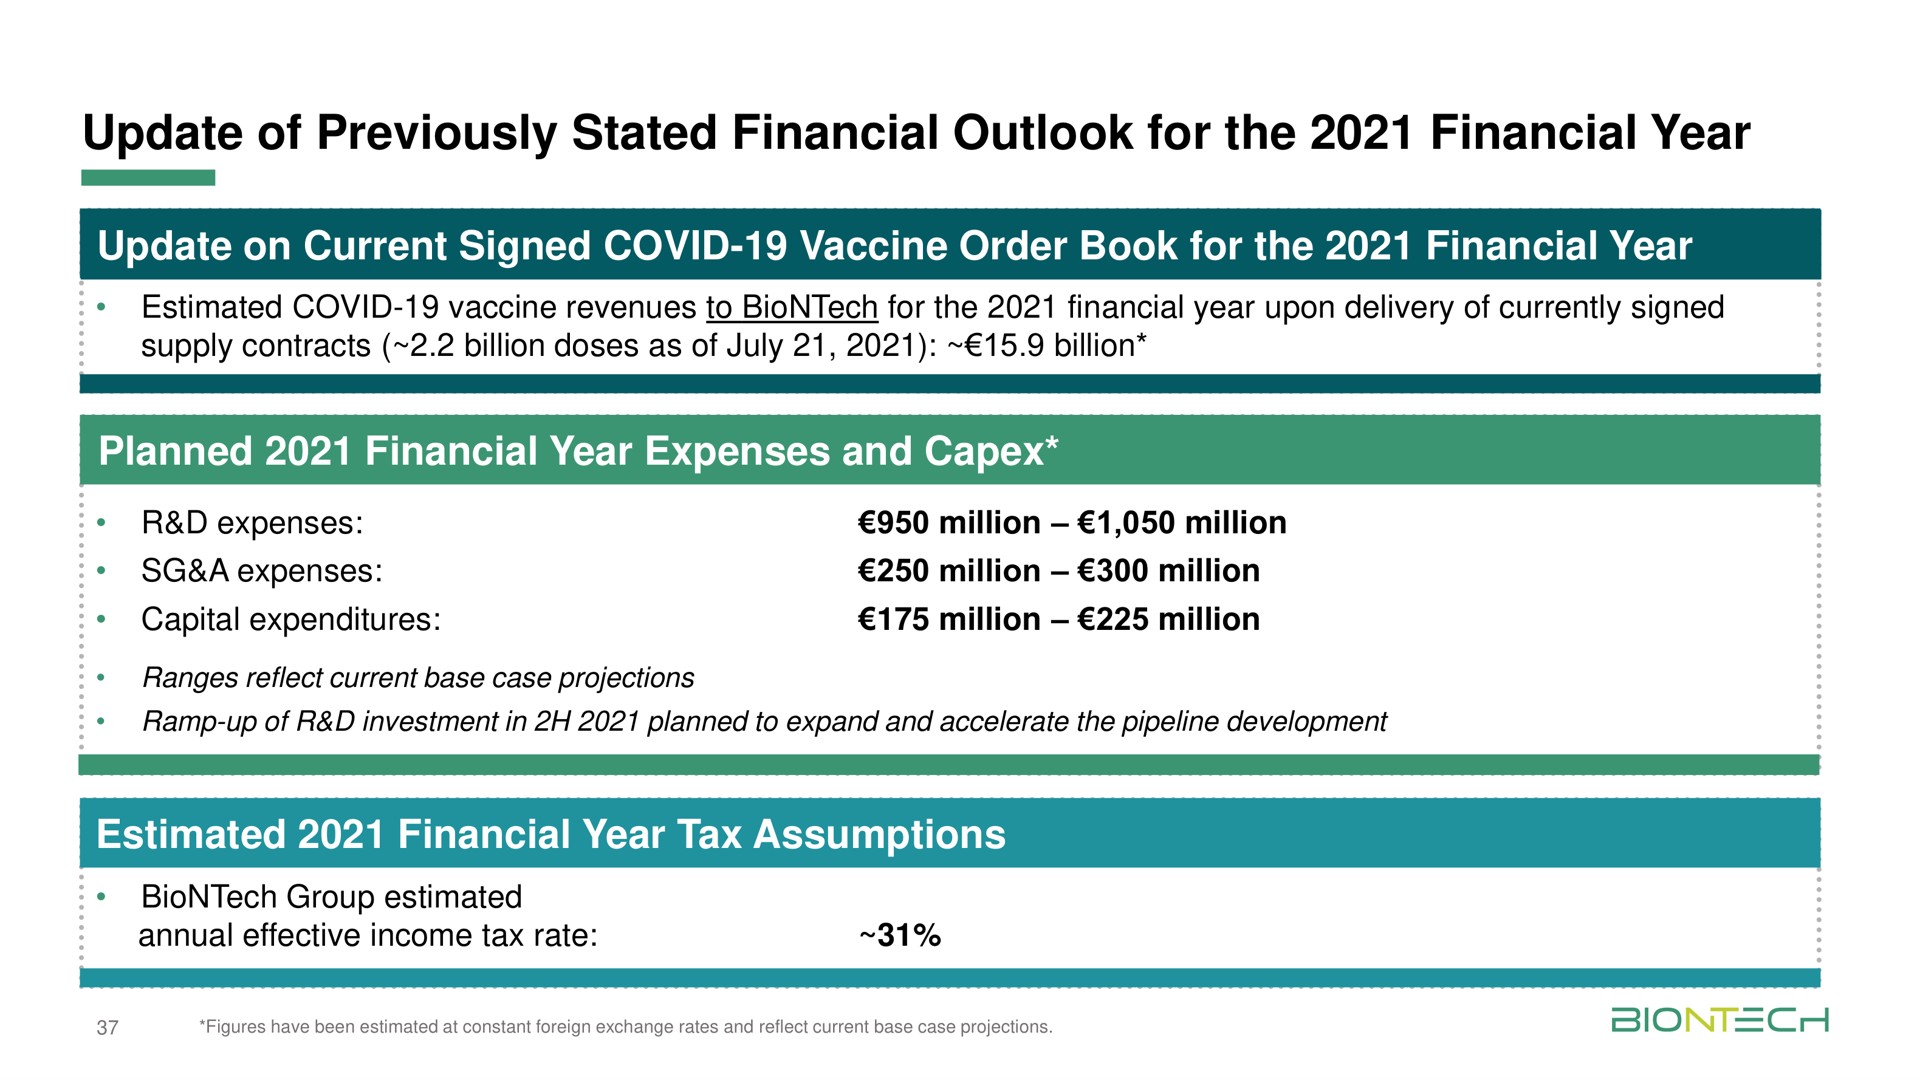 update of previously stated financial outlook for the financial year update on current signed covid vaccine order book update on current signed covid vaccine order book for the financial year planned financial year expenses and estimated financial year tax assumptions | BioNTech